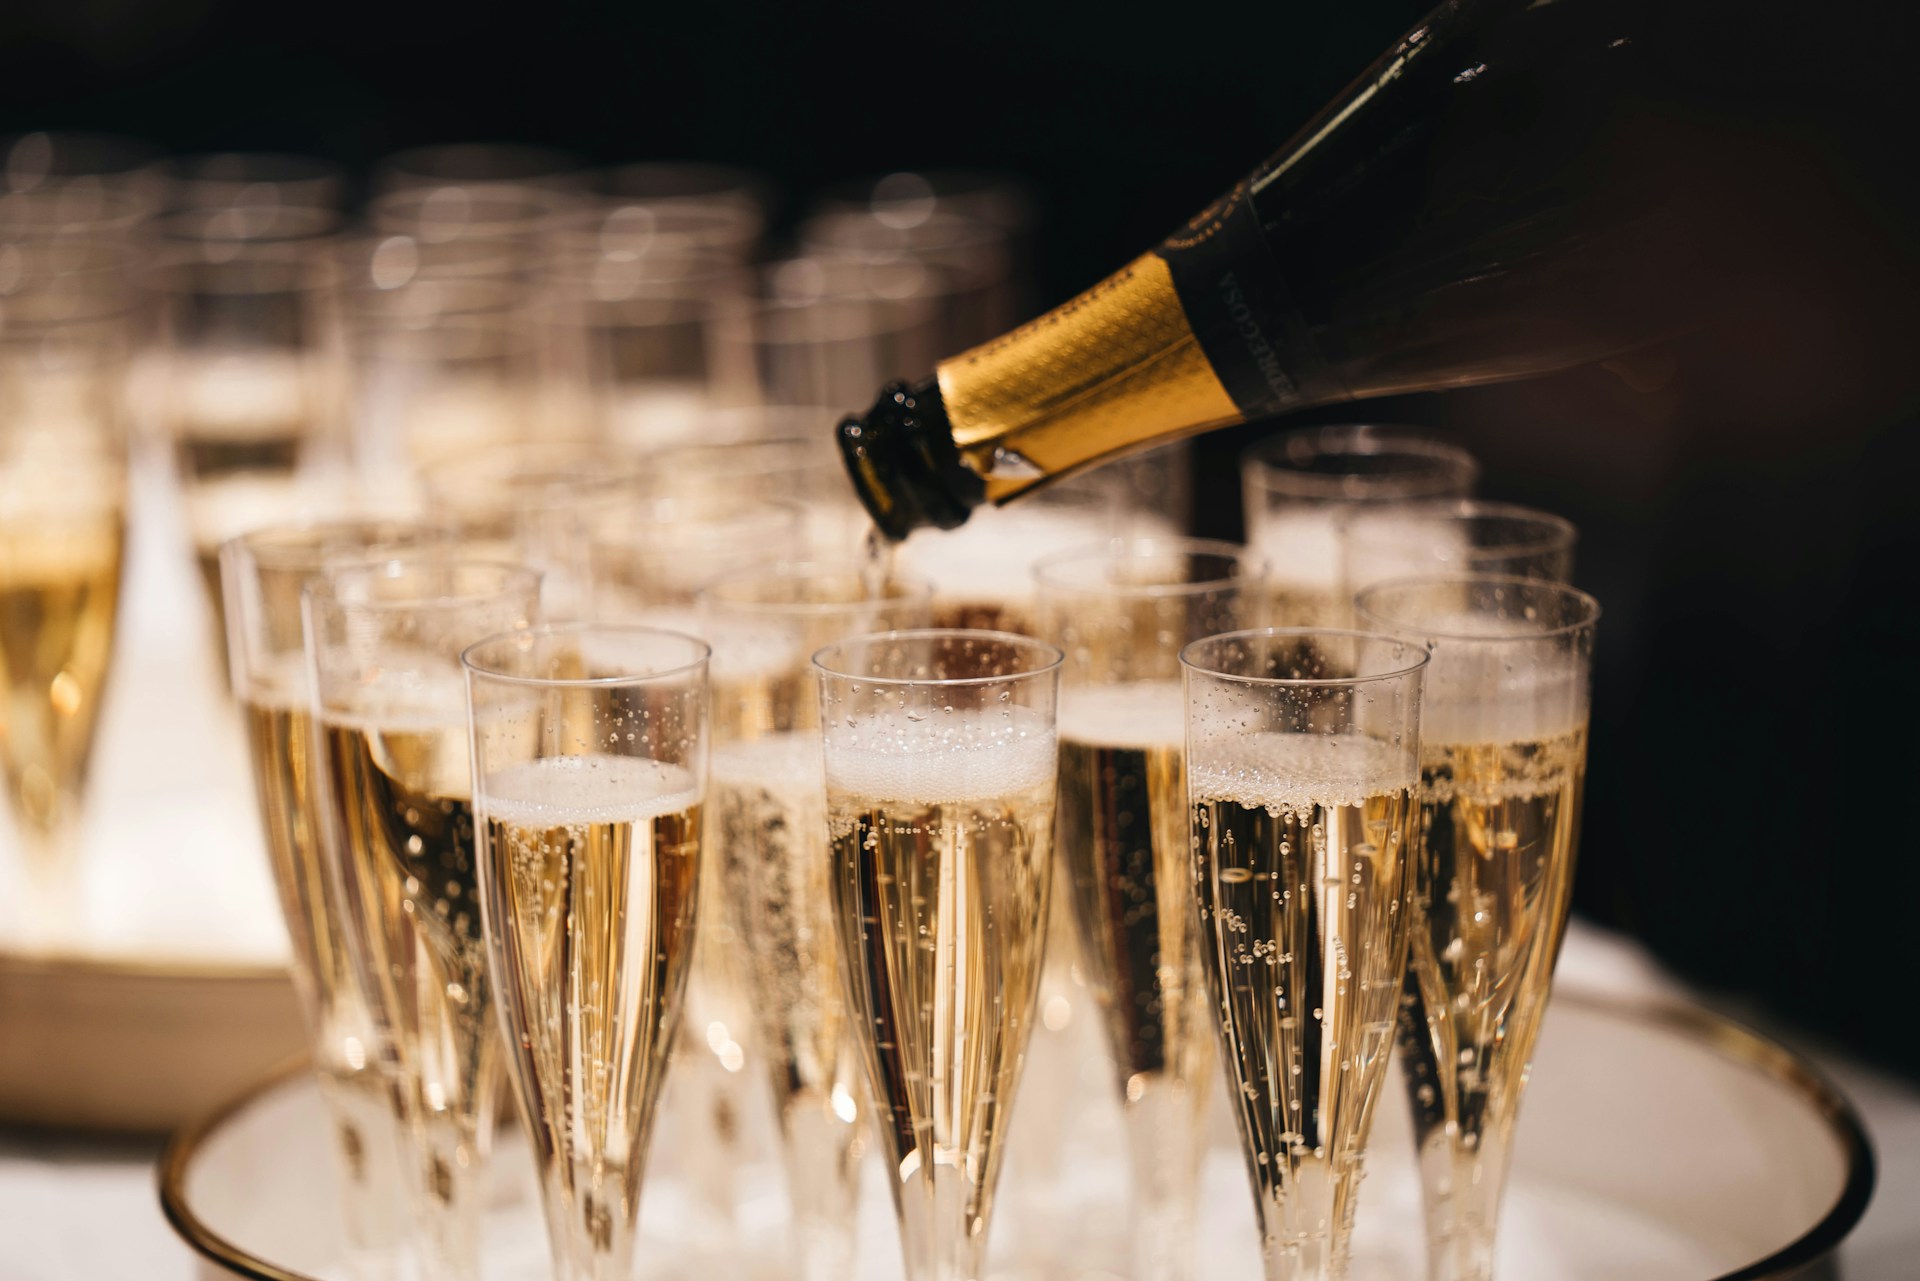 Duval-Leroy the Preferred Champagne for Silversea Cruises